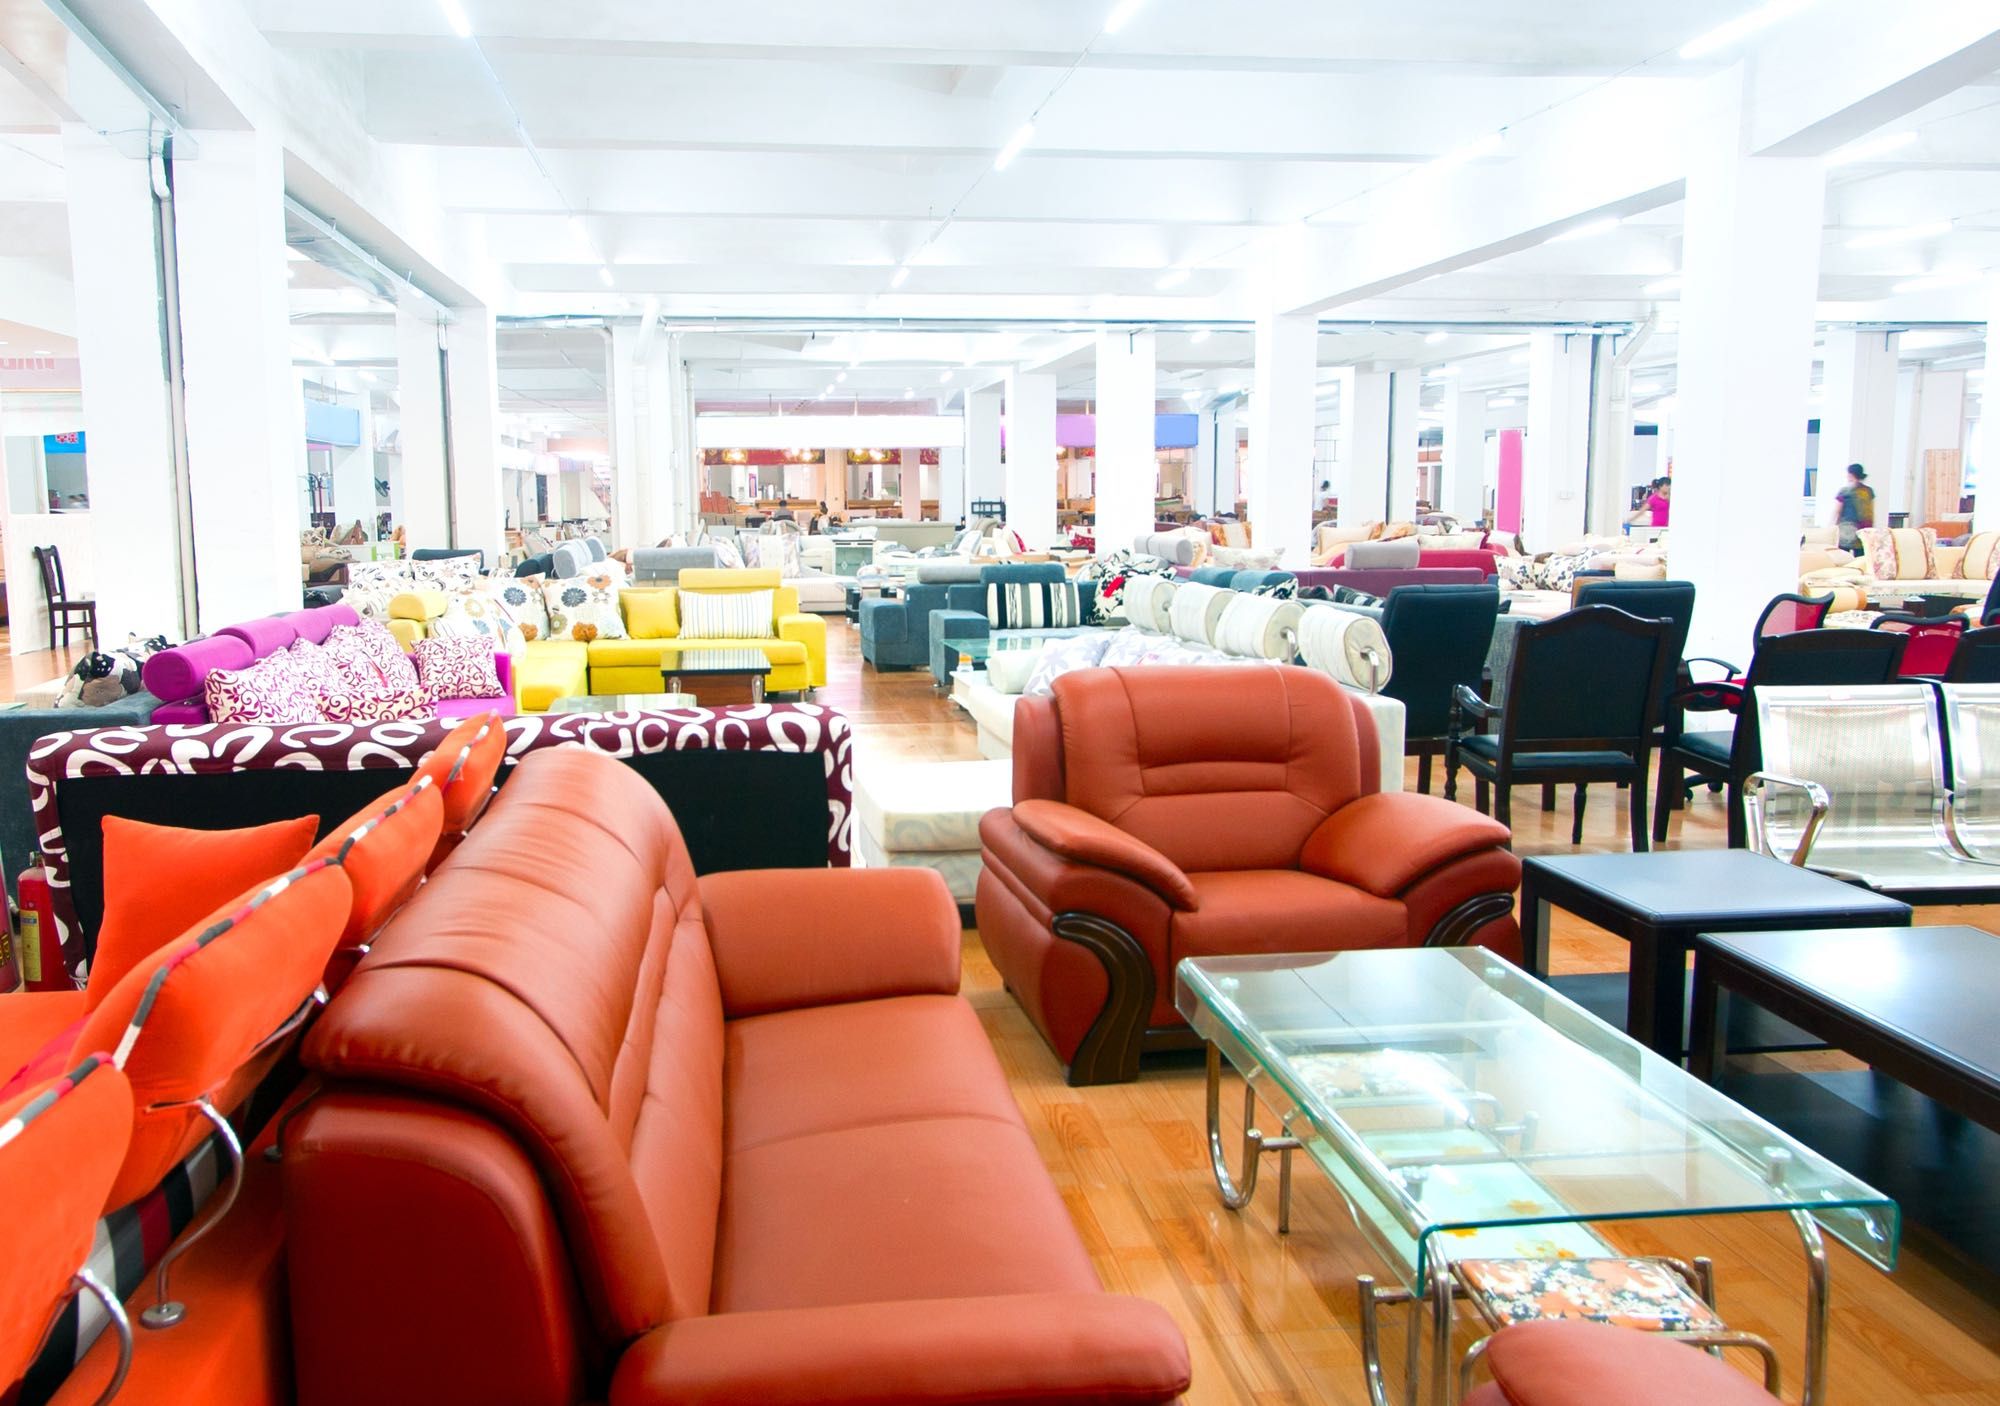 Furniture retailer showroom of products sold on credit